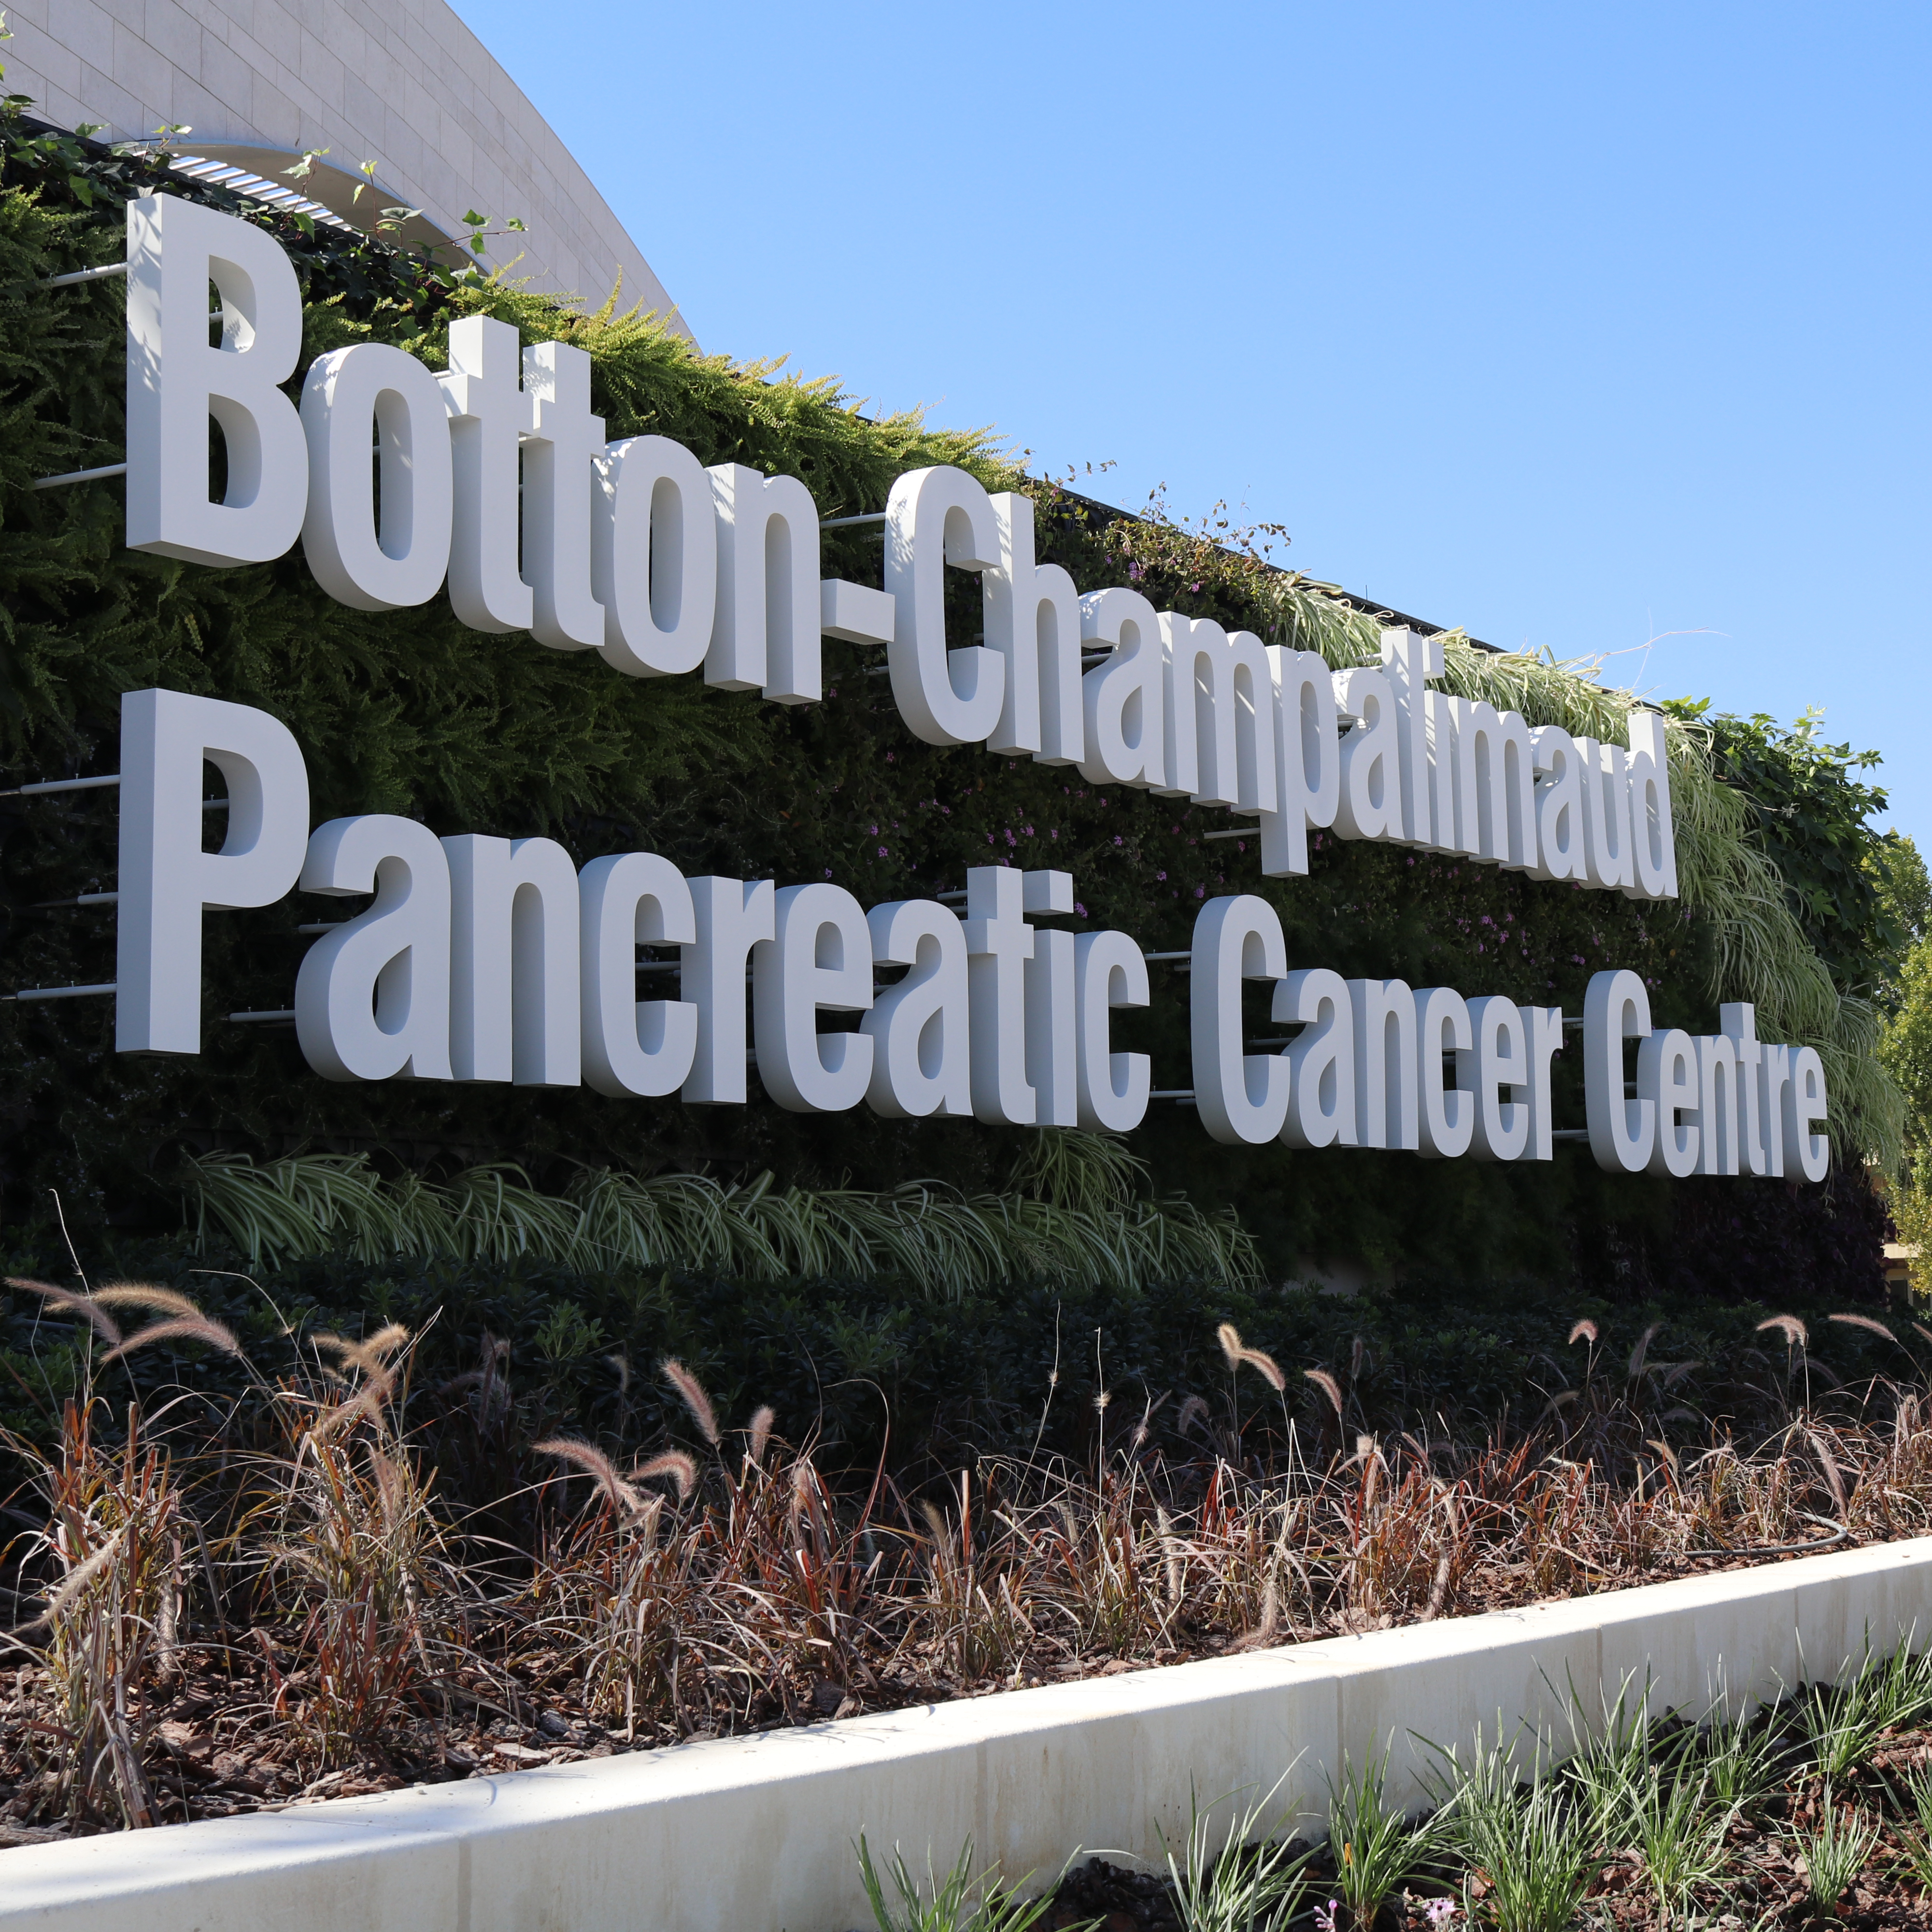 Inauguration of the Botton-Champalimaud Pancreatic Cancer Centre